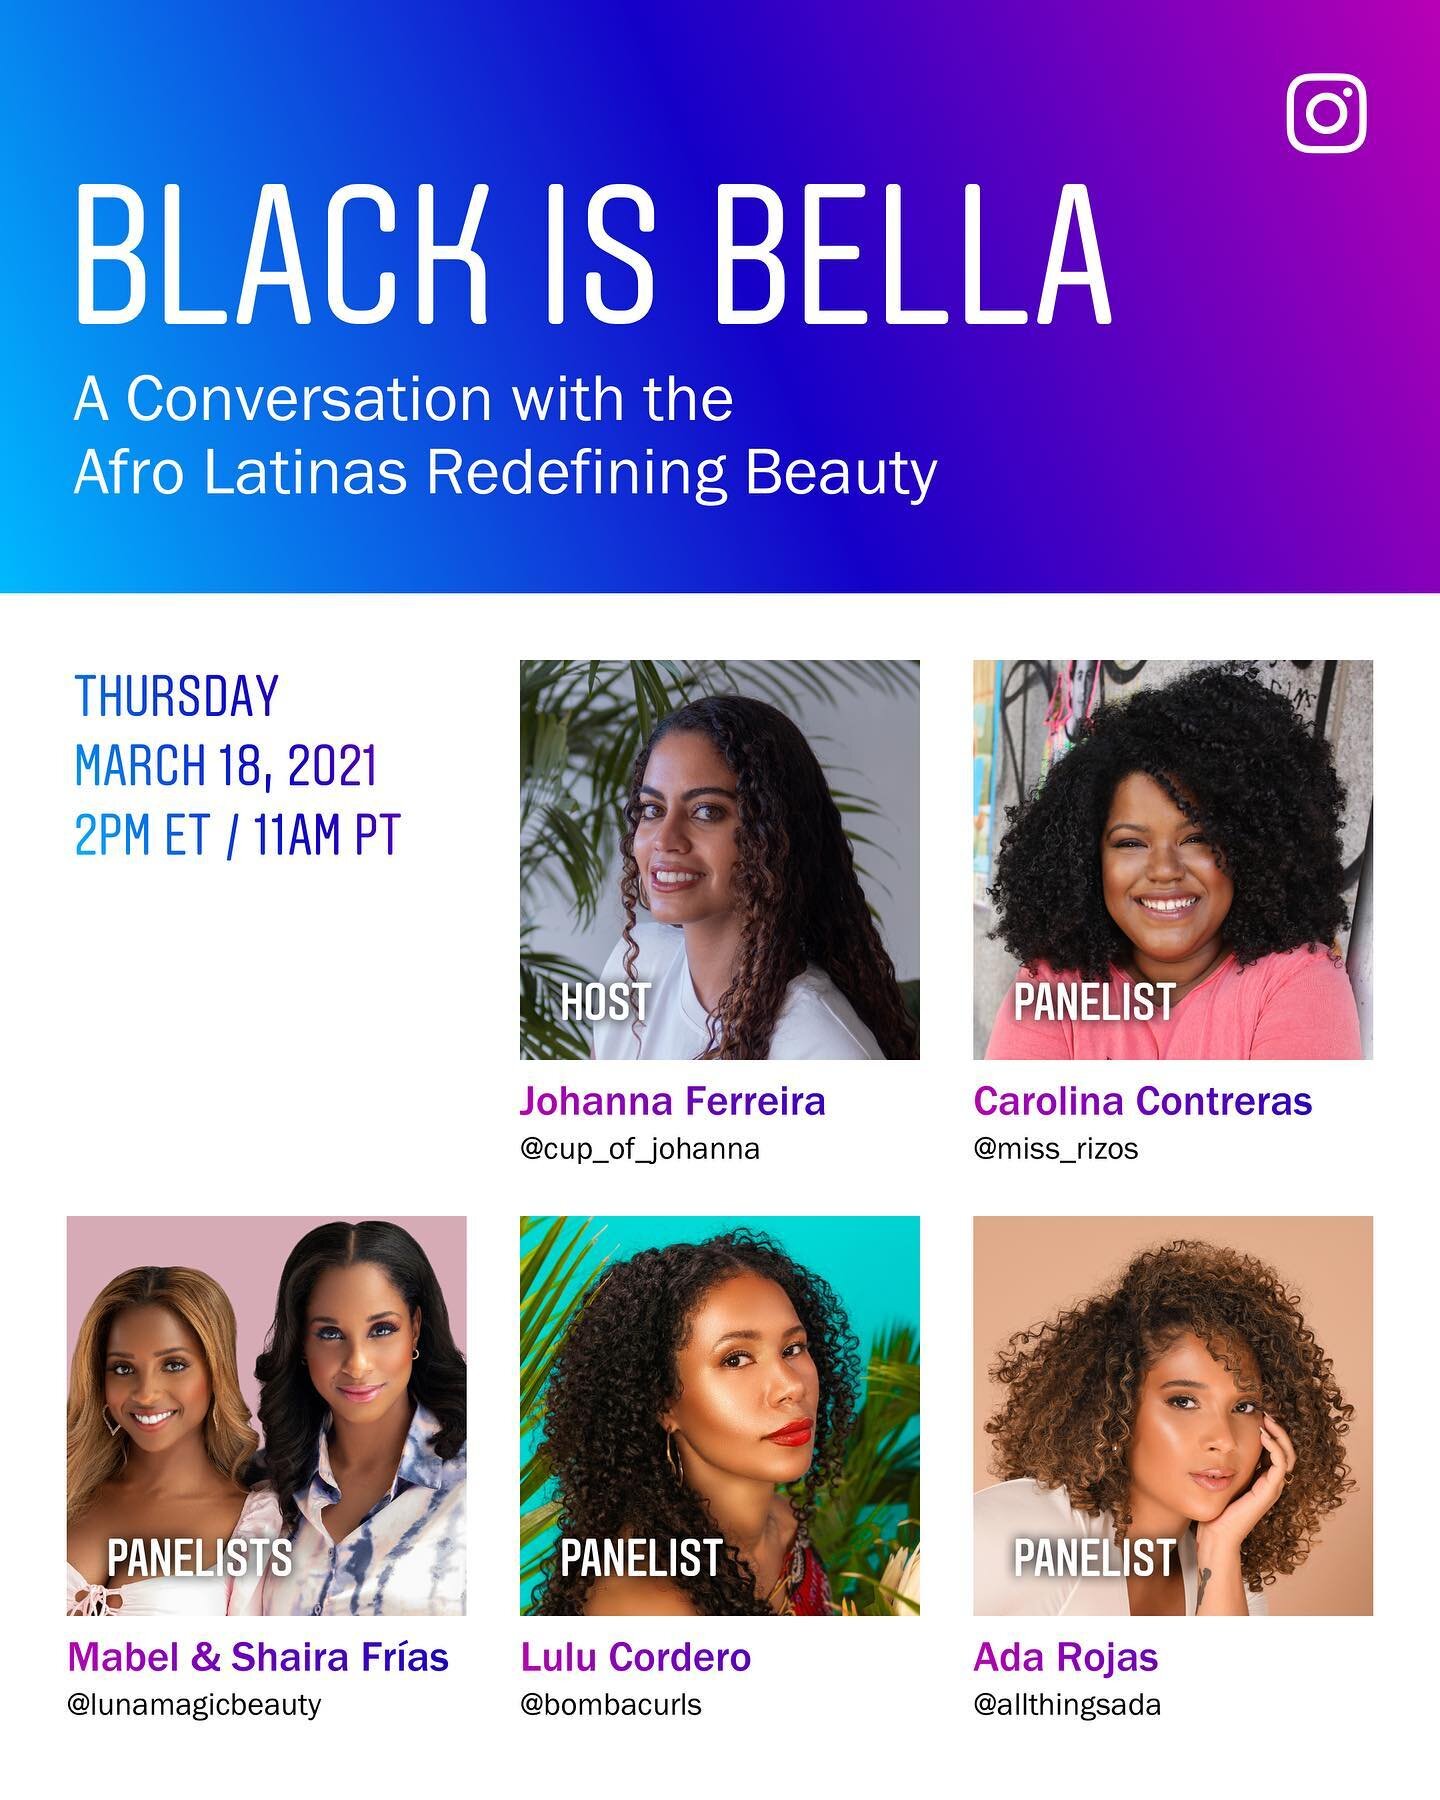 A month ago, I had a vision to put together a powerful discussion with Afro-Latina beauty brand owners and trailblazers &mdash; many who I consider friends &mdash; to hold space for a conversation on how they are redefining the beauty landscape to in